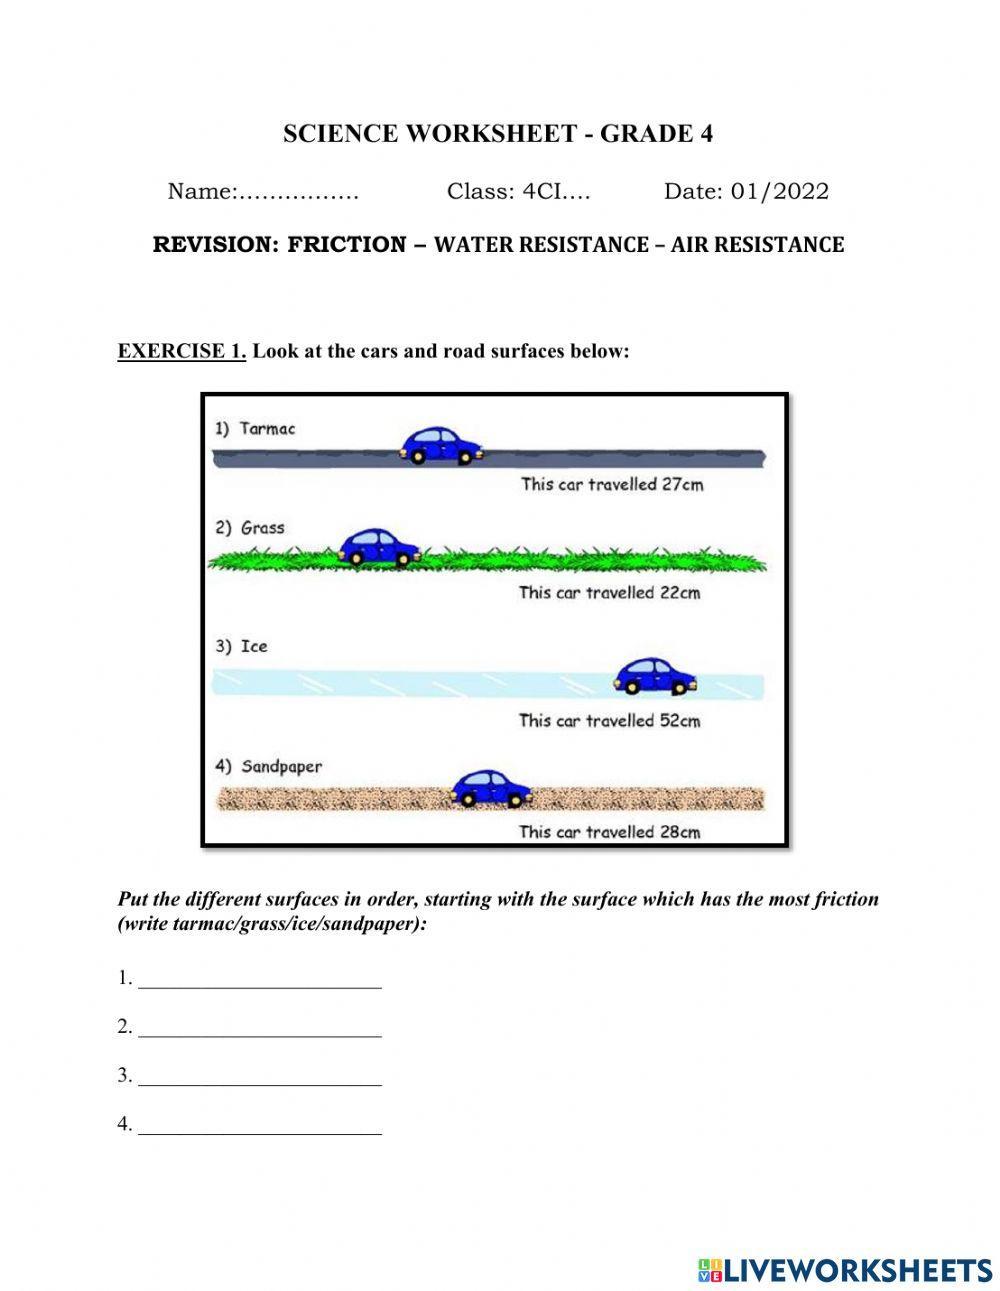 W21. Review friction